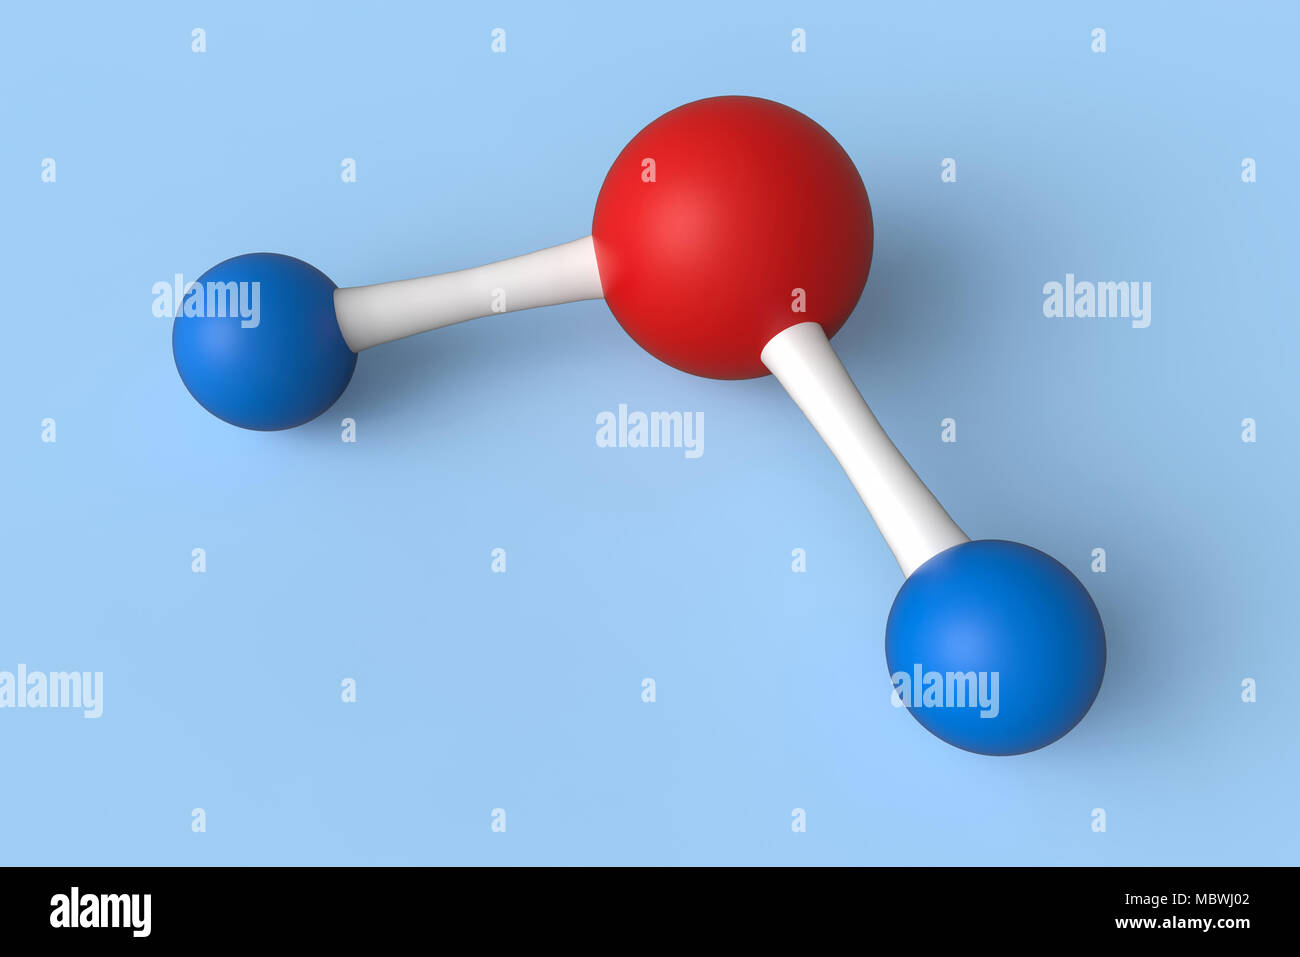 Water or H2O Molecule model isolated on blue background. 3d illustration Stock Photo